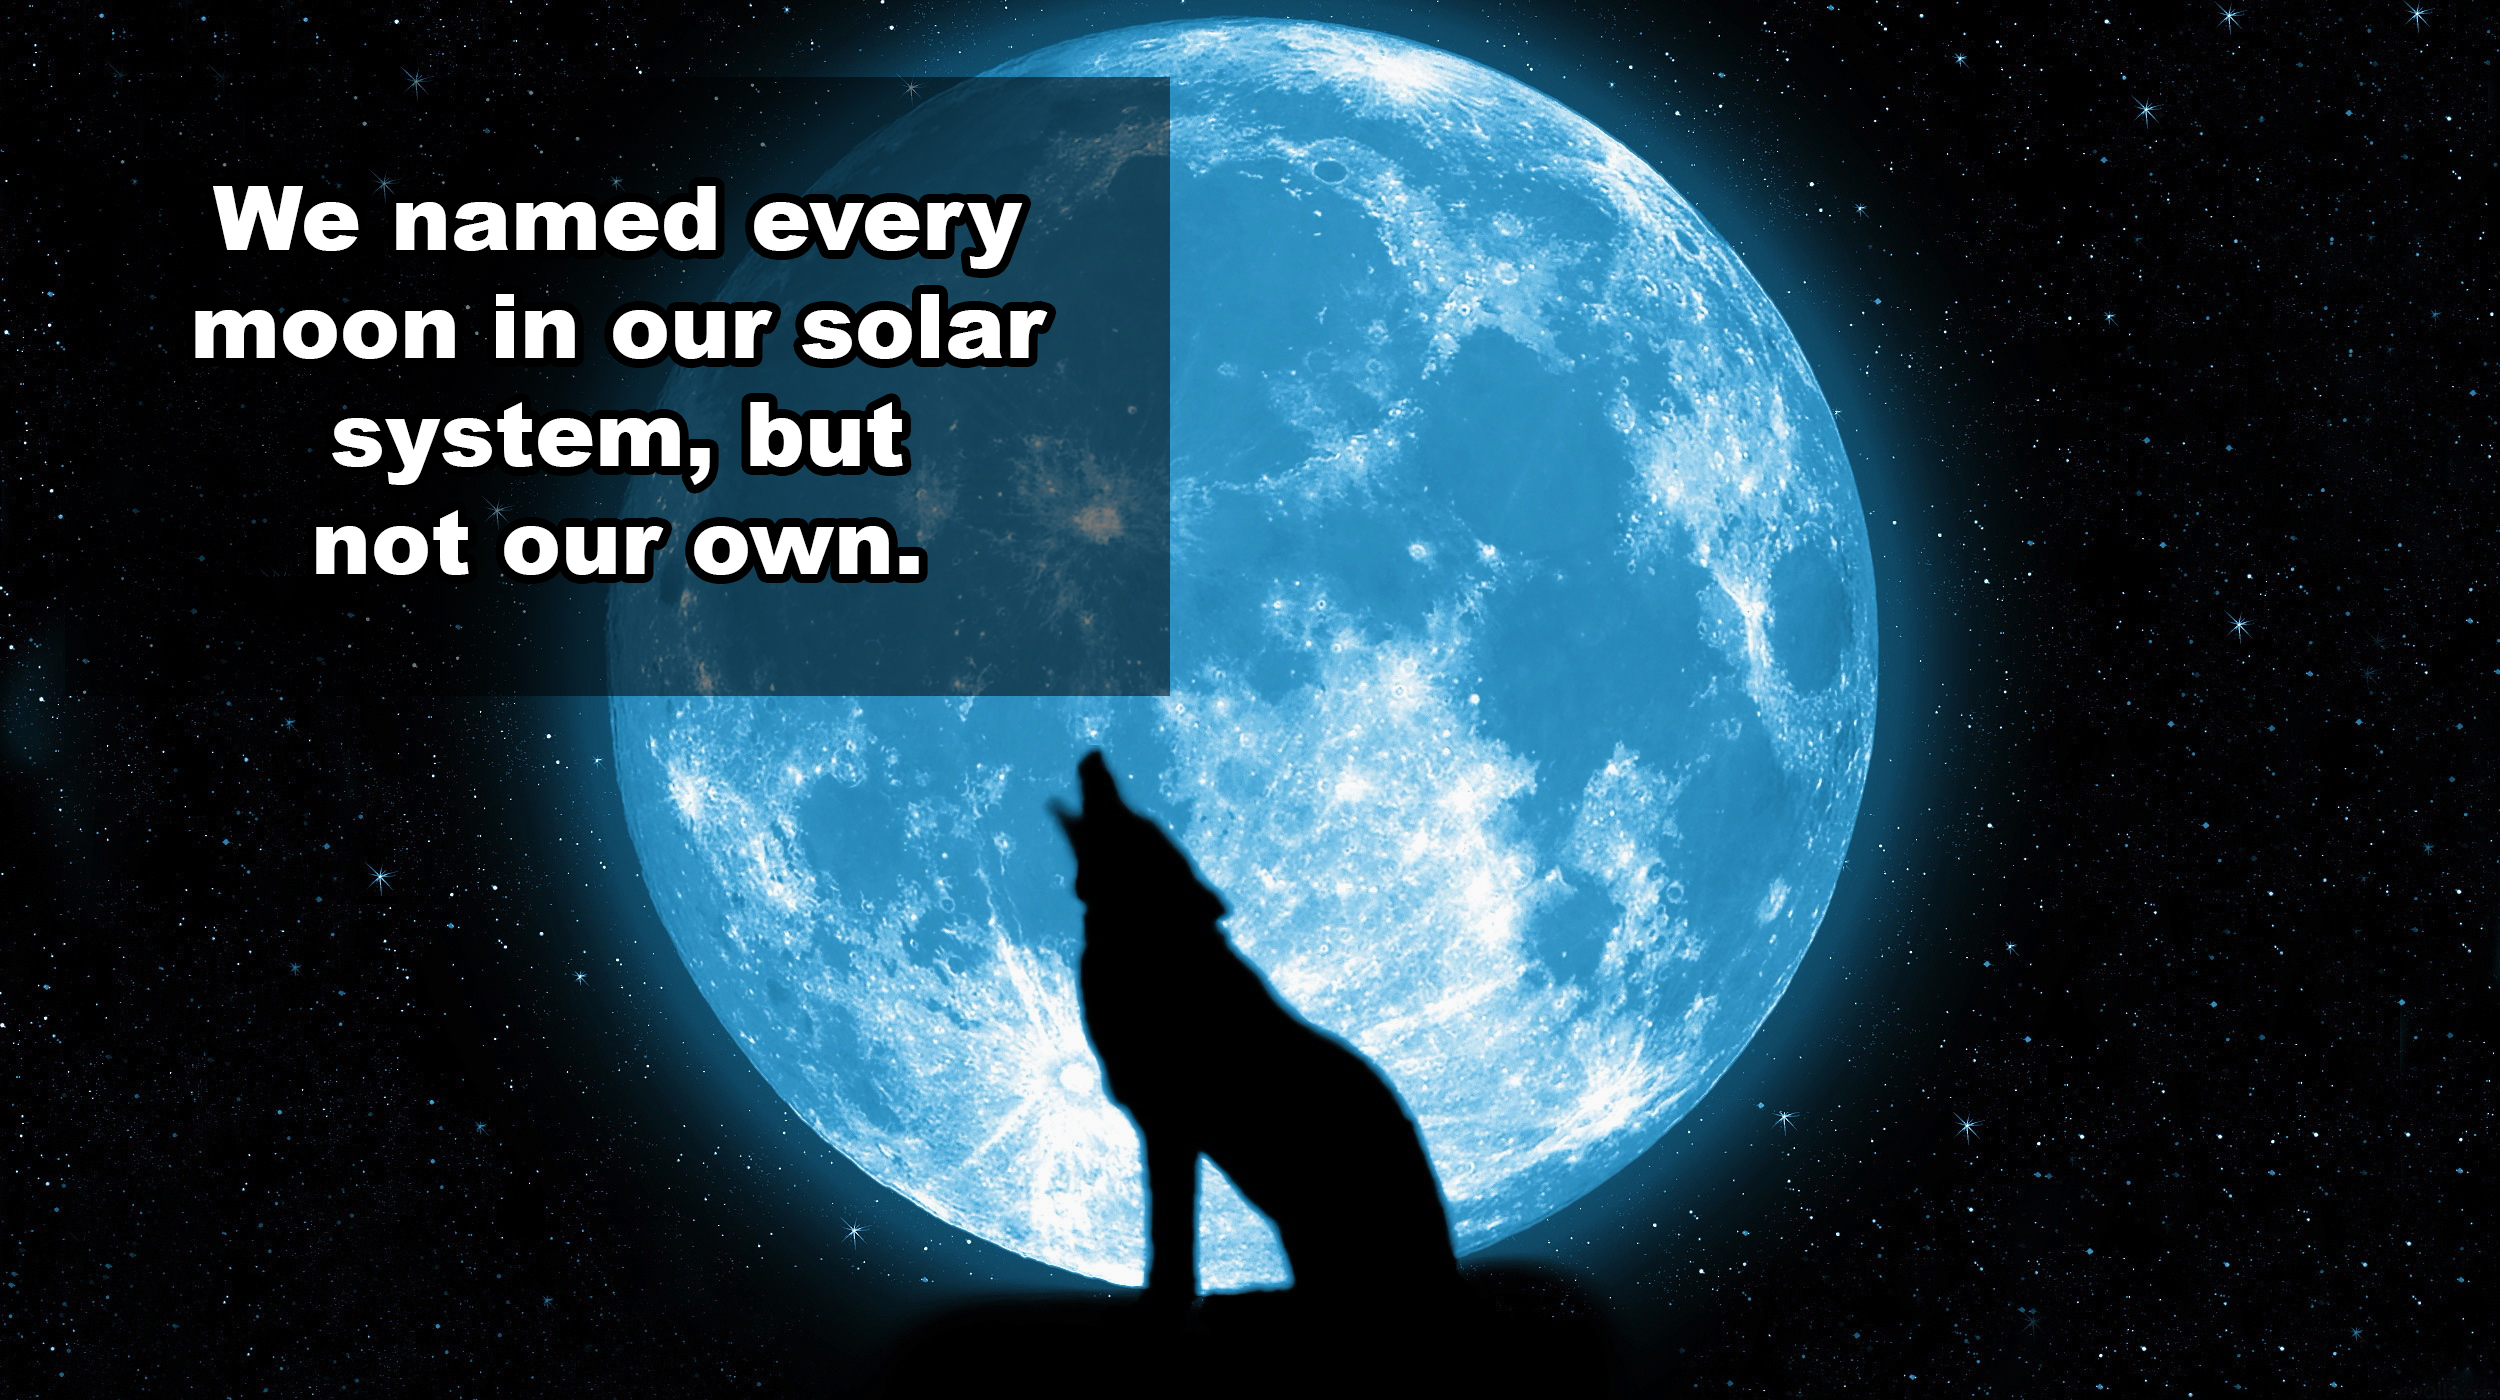 wolf howling at the moon hd - We named every moon in our solar system, but not our own.